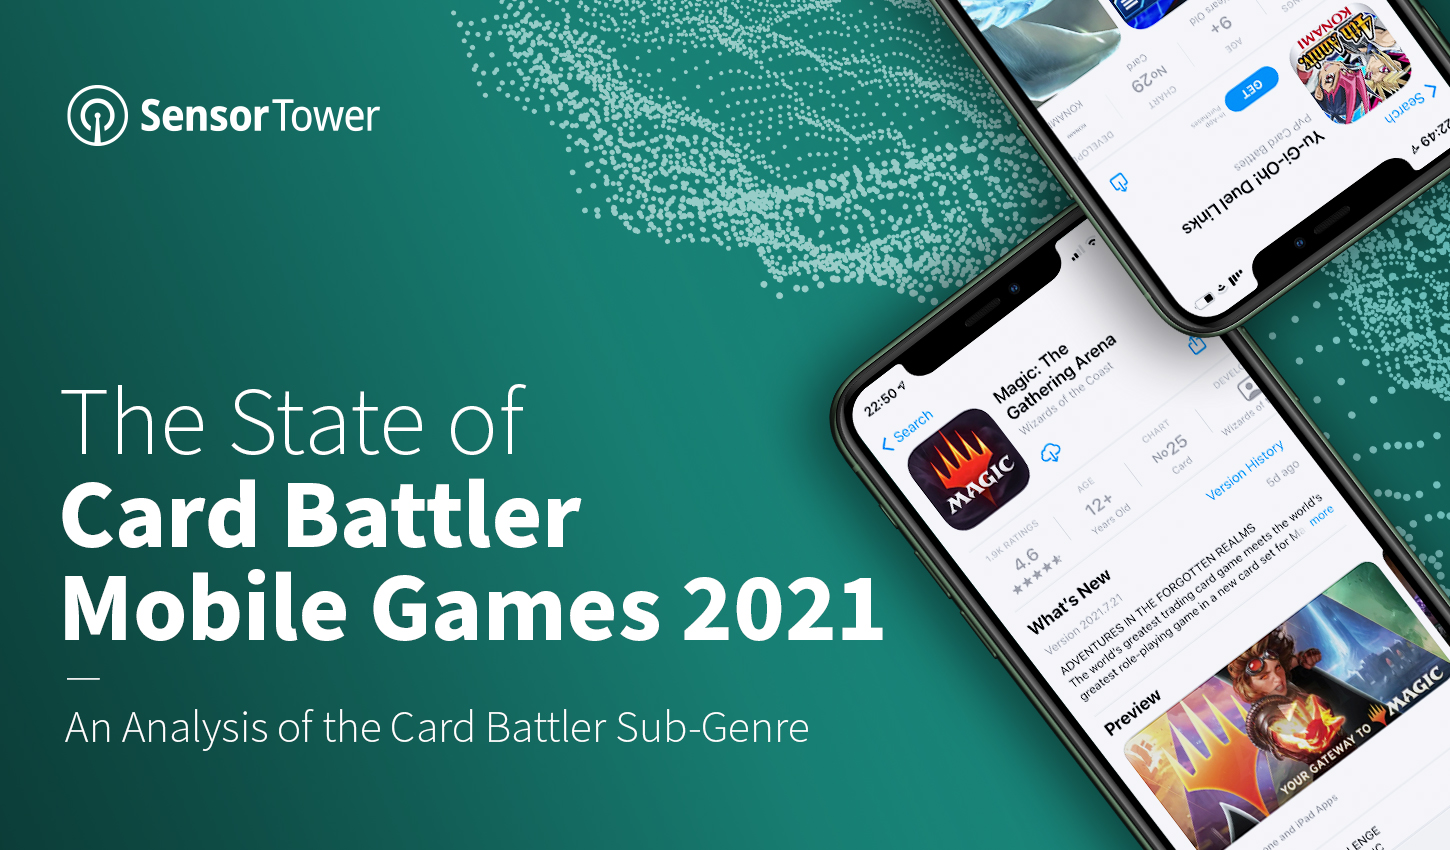 State of Card Battler Mobile Games 2021 Report main image feature